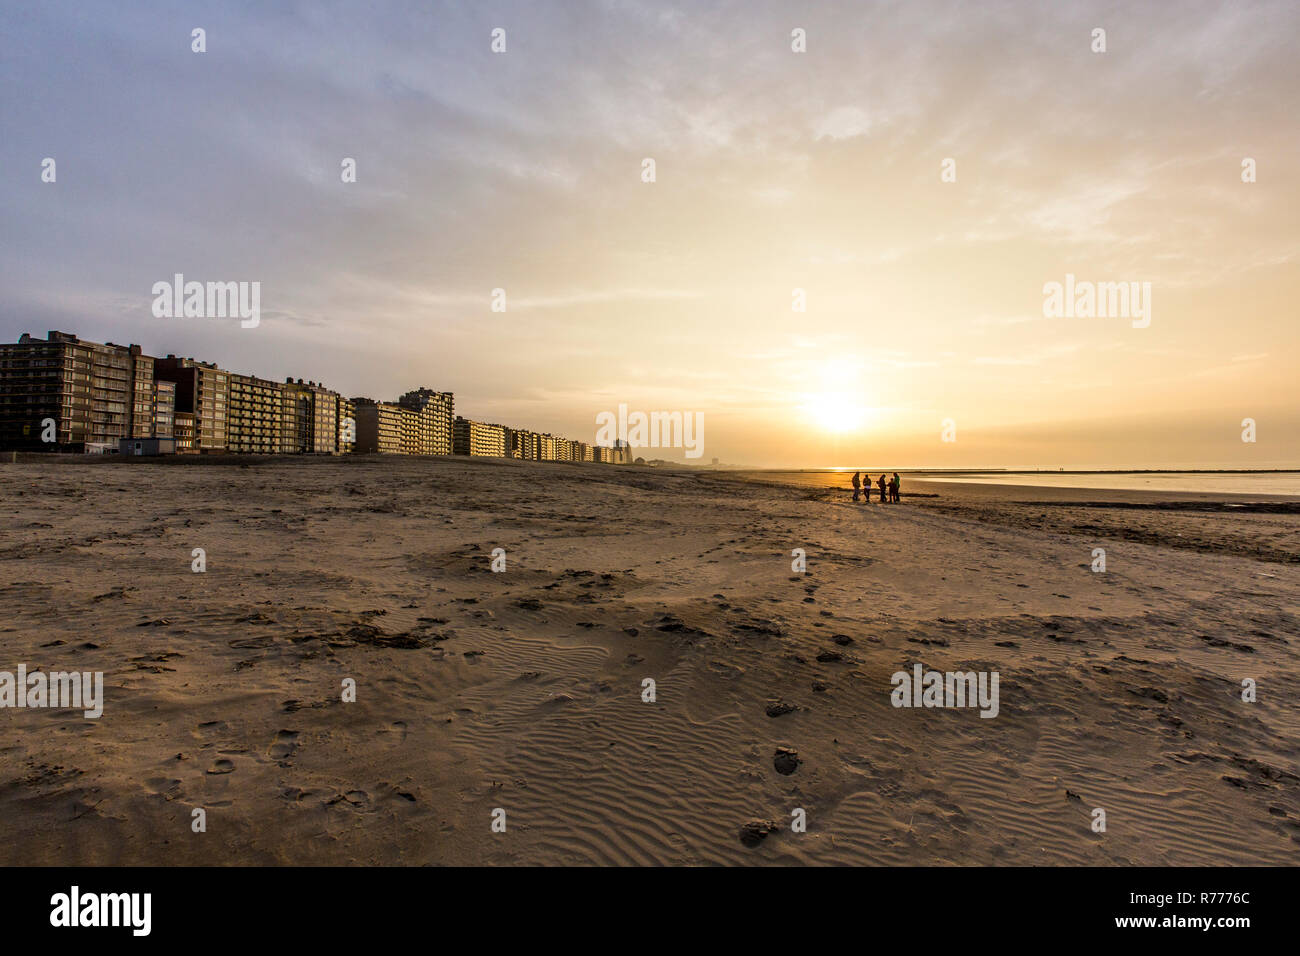 High-rise buildings on the beach in the coastal town of Nieuwpoort, Flanders, Belgium Stock Photo